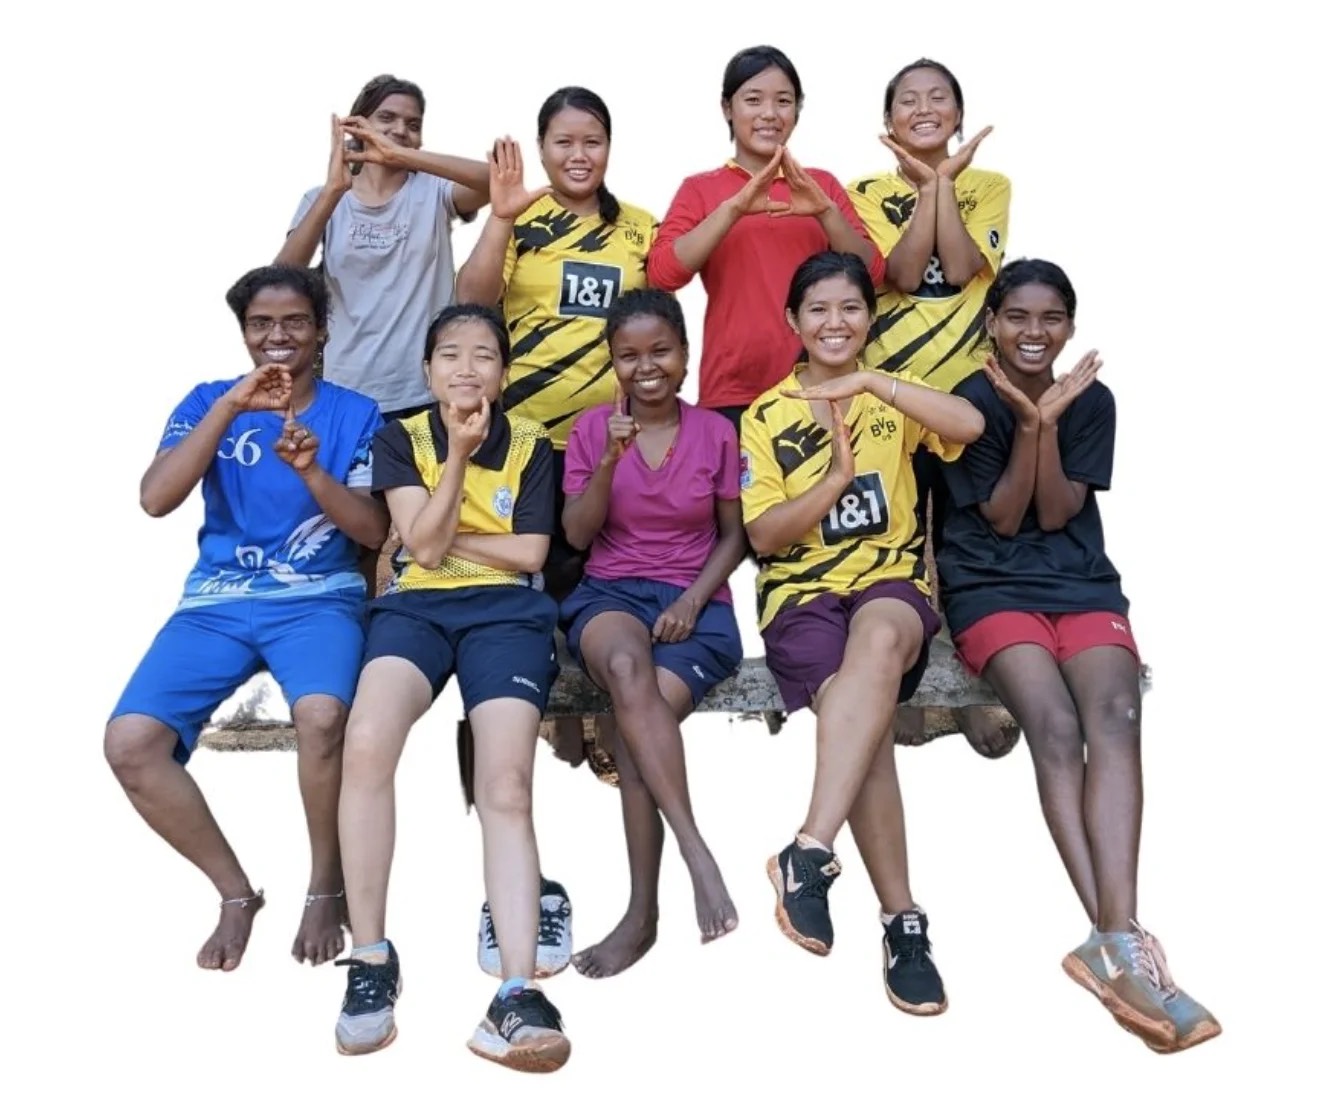 Gender Equity Through Play: Pudiyador’s Playquity Empowered By AIF’s Banyan Impact Fellowship